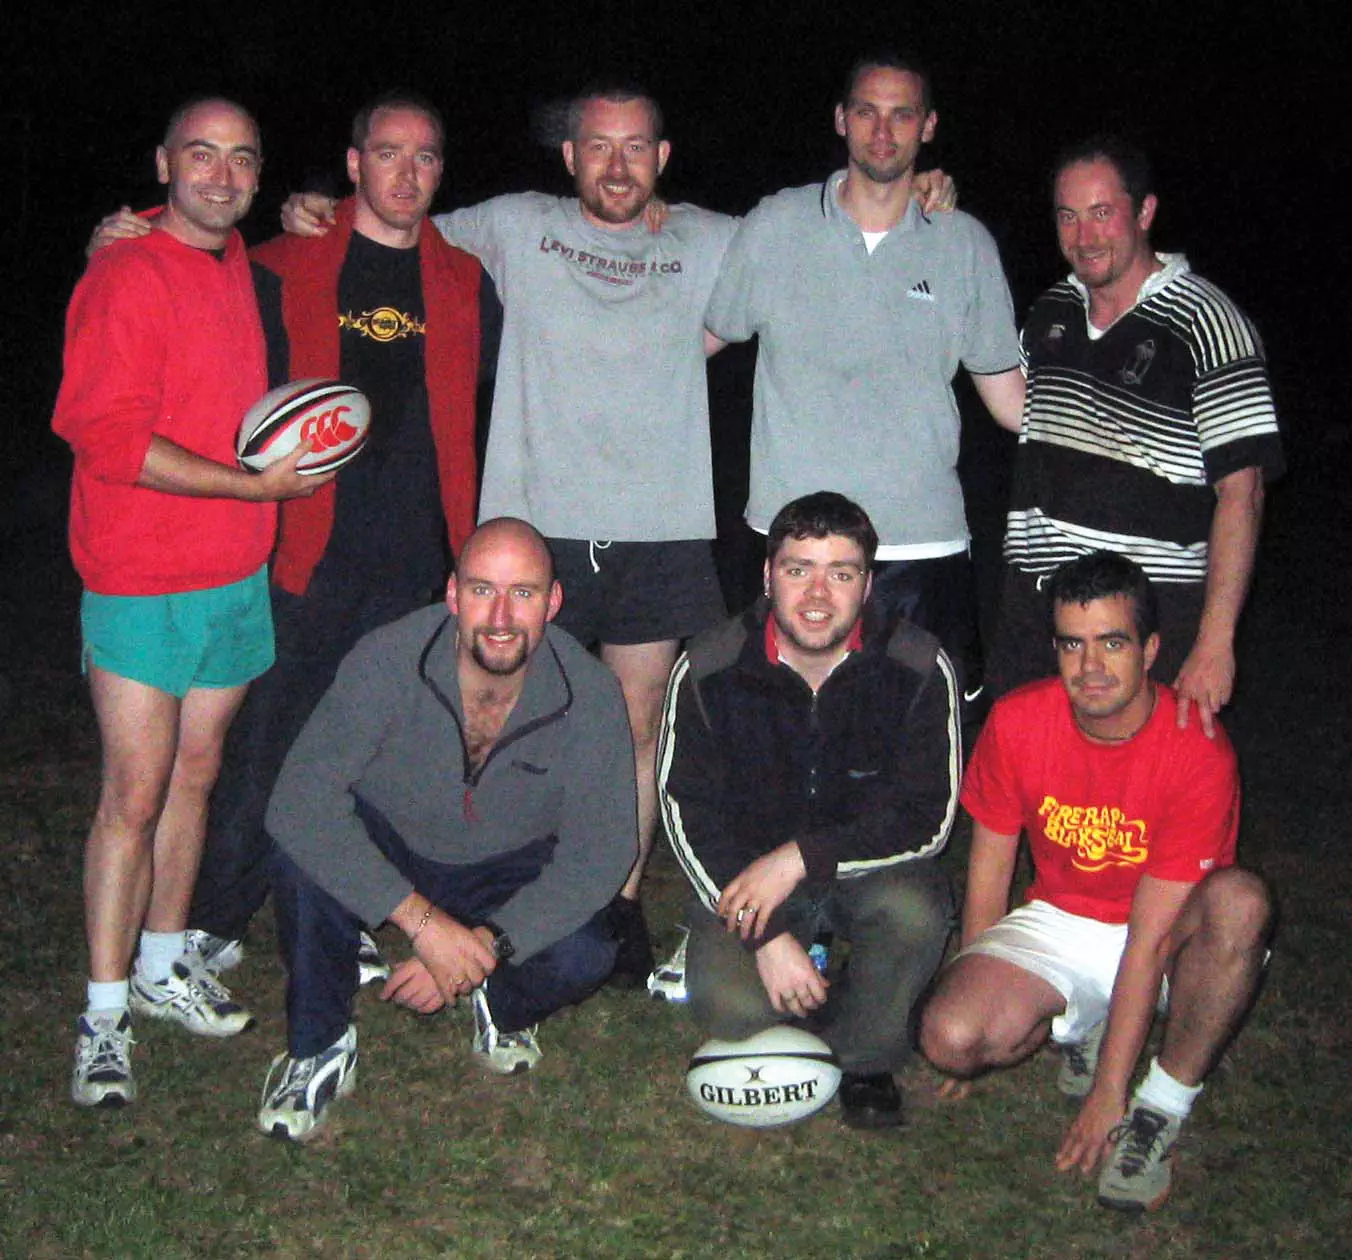 Founding members of the Emerald Warriors Rugby Football Club